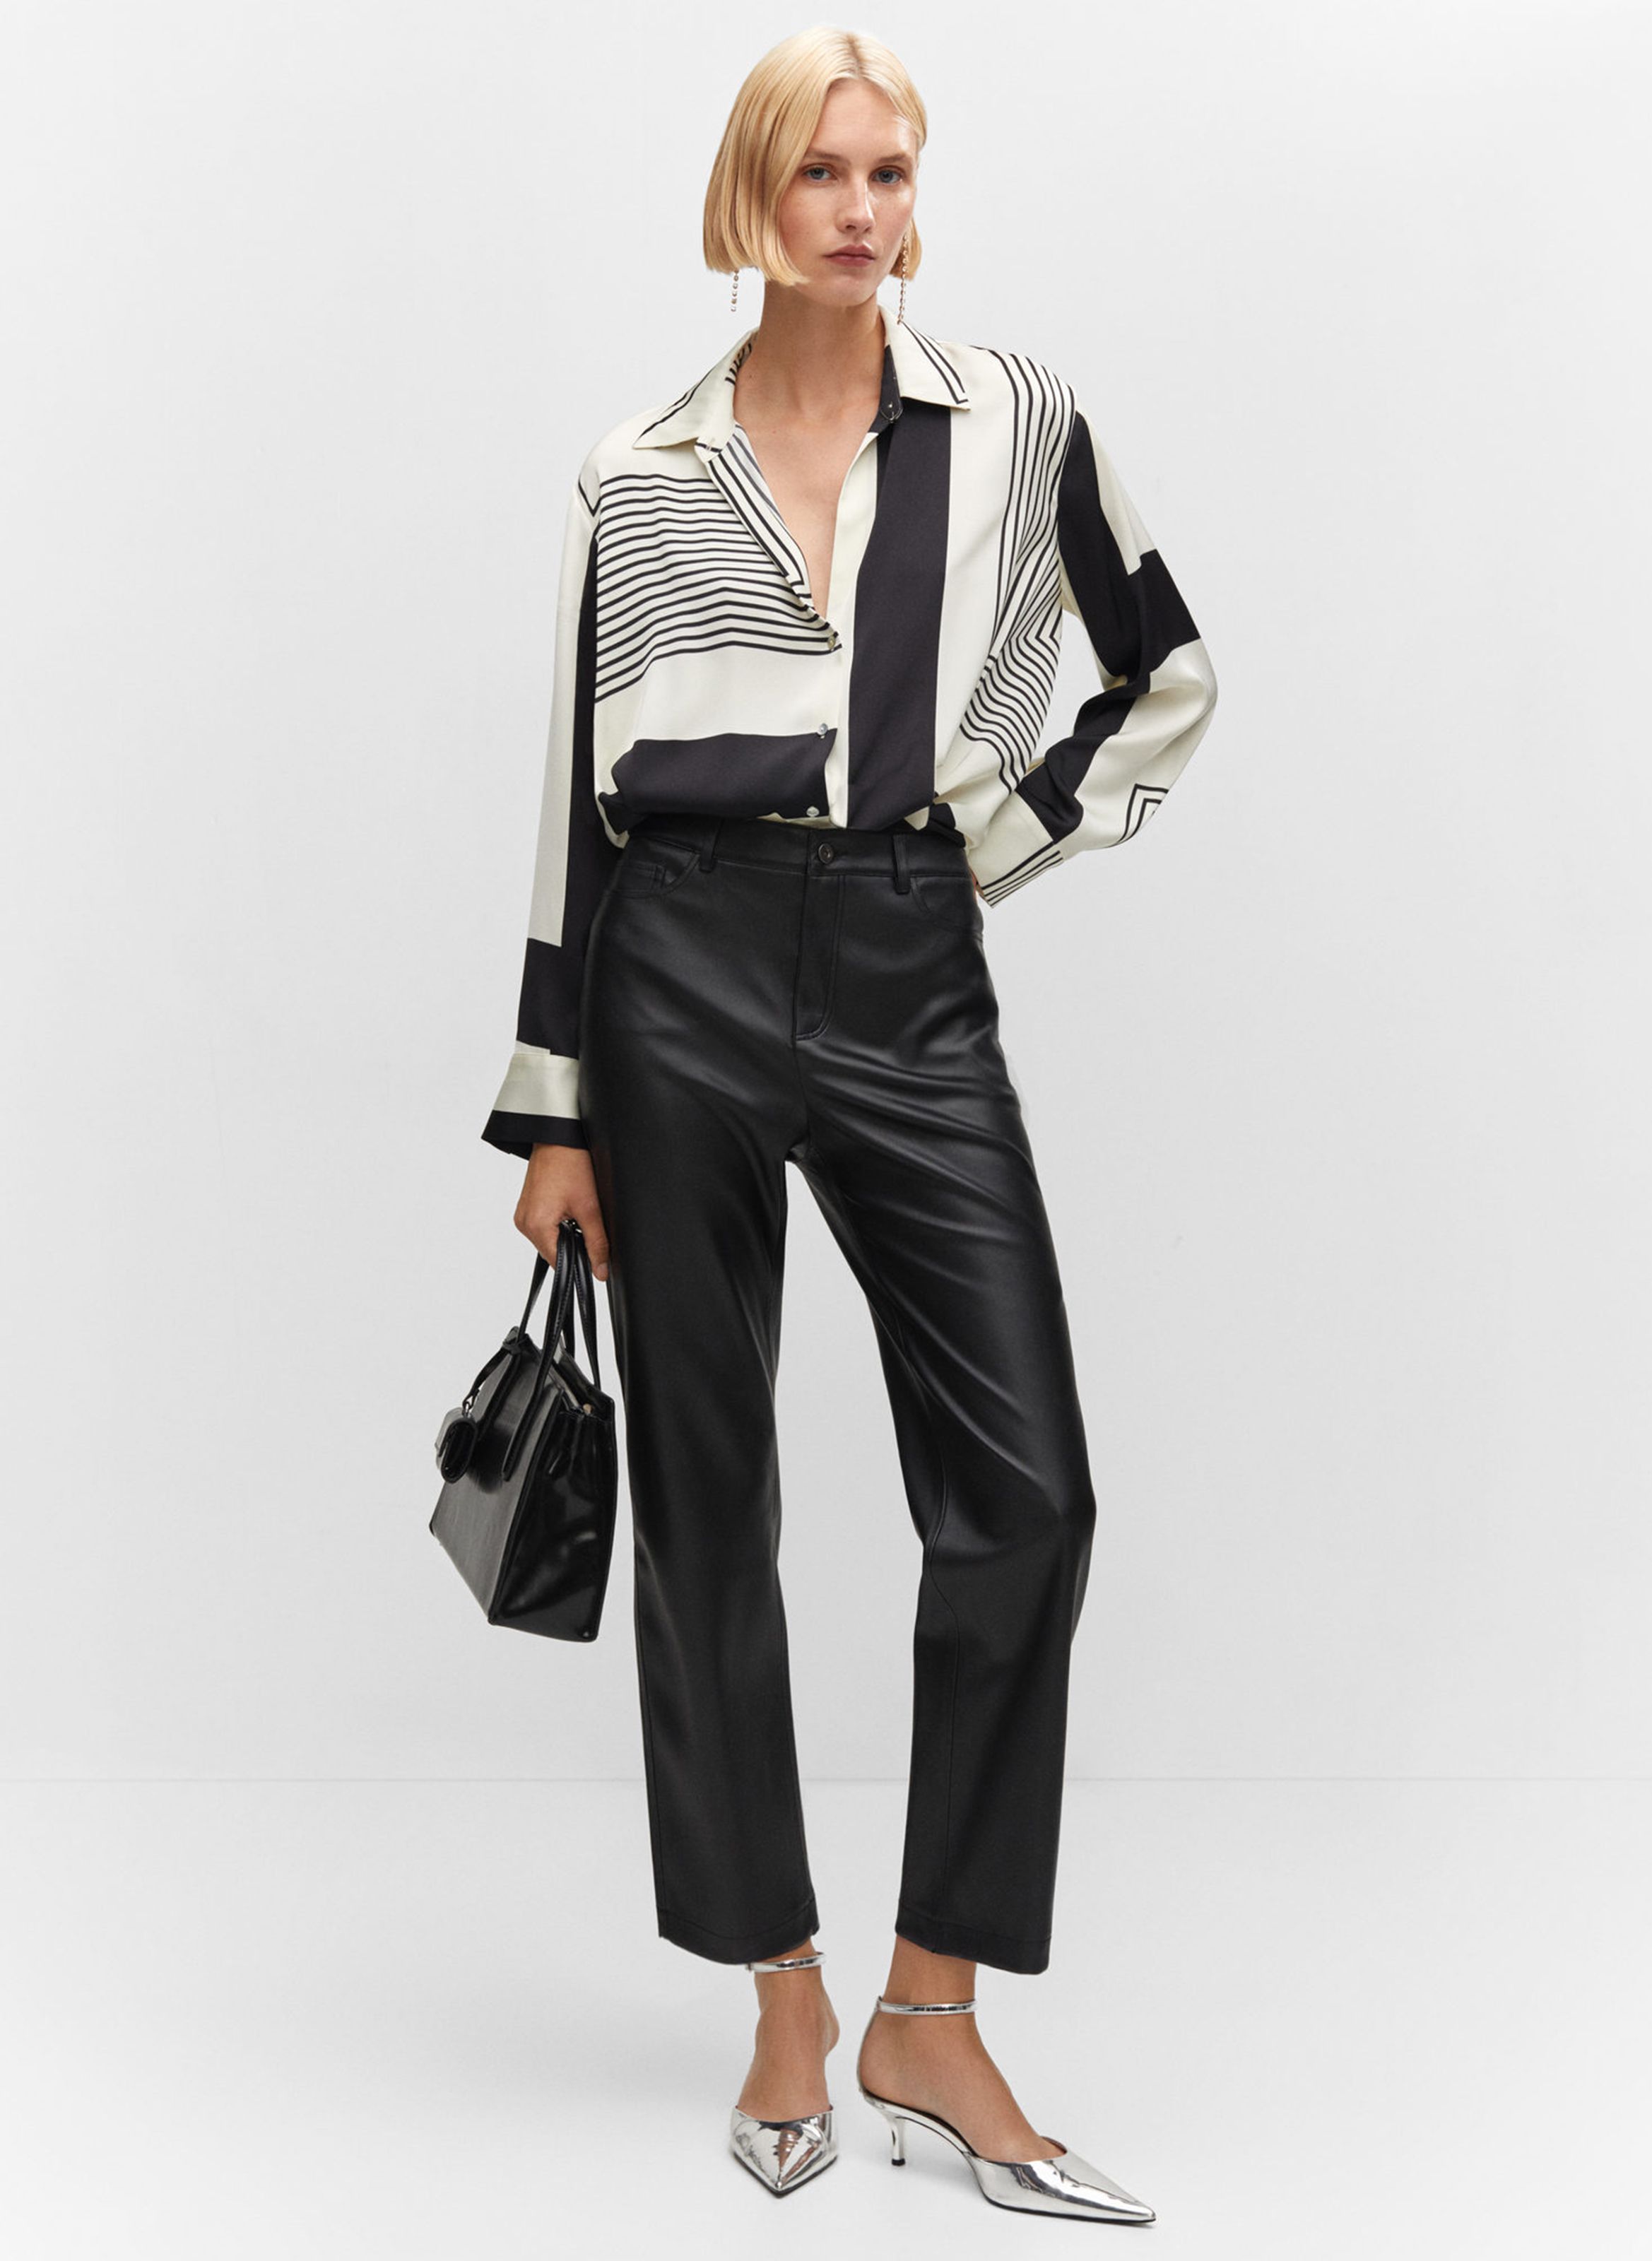 Mango Women's Leather-Effect Straight Trousers | Hawthorn Mall